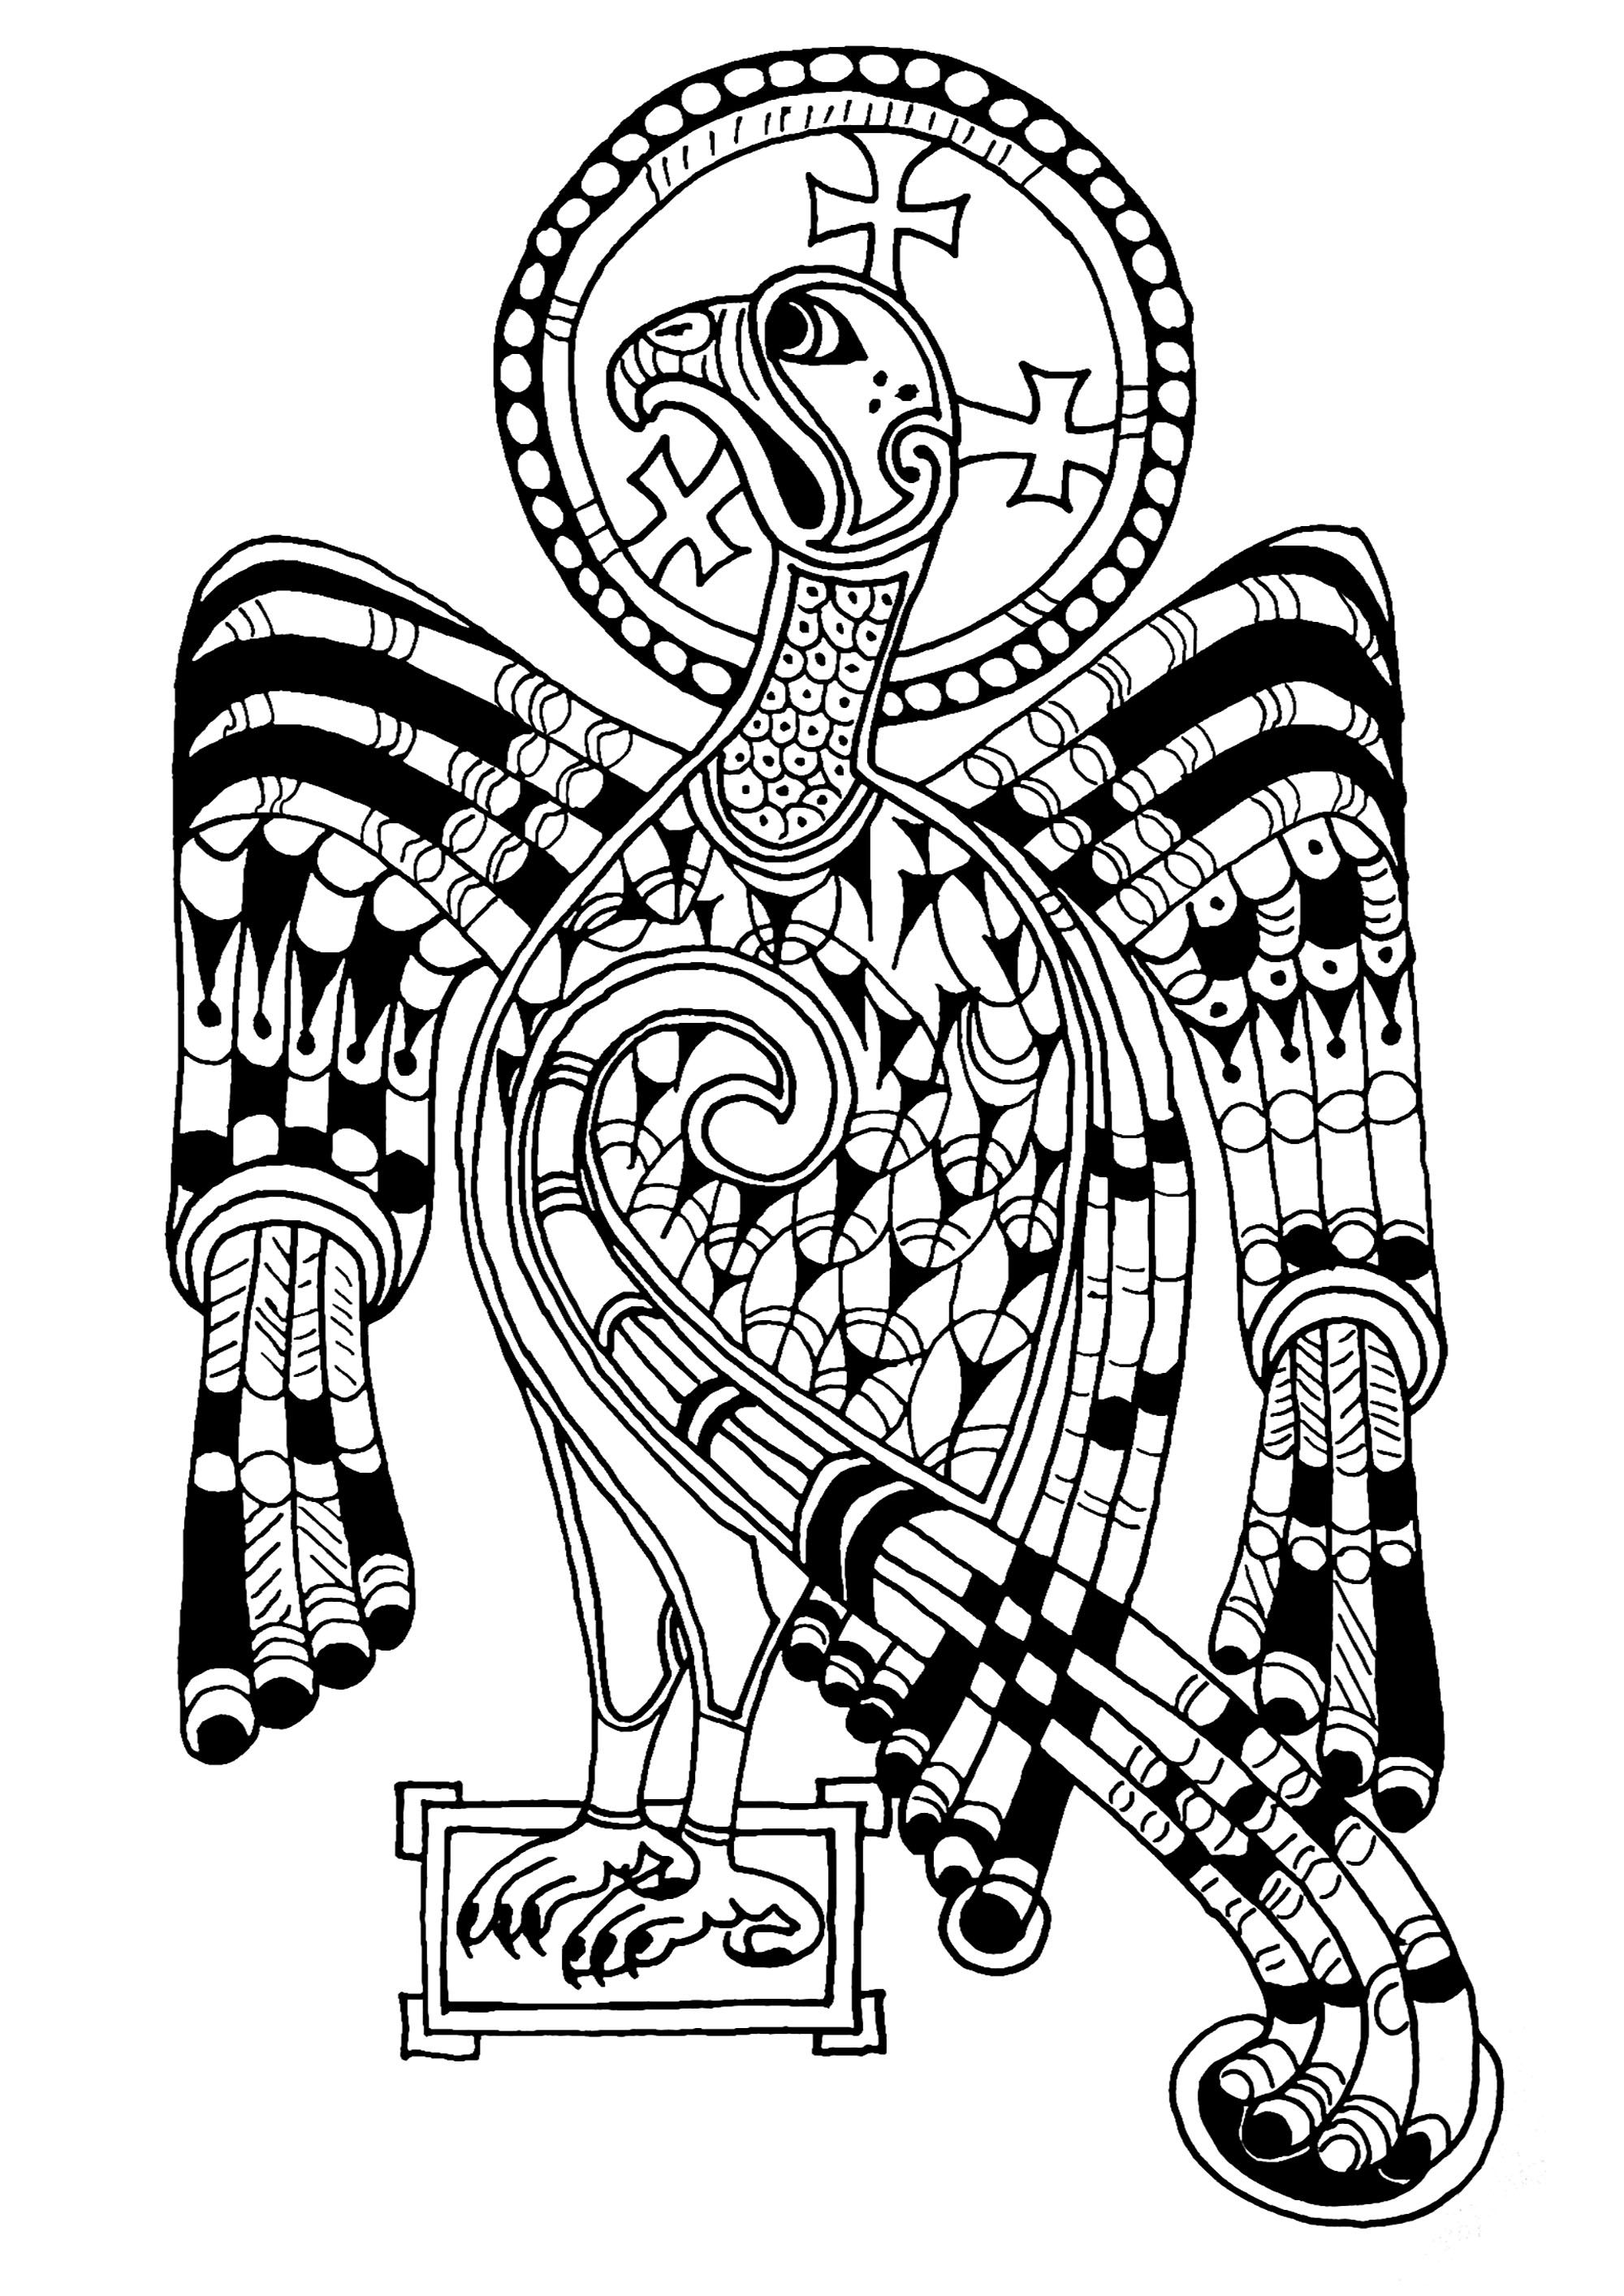 Eagle depicted in the Book of Kells, symbolizing St. John and the Ascension of Jesus. The 'Book of Kells' is a medieval manuscript dating from the Middle Ages (9th century). 680 pages remain, they bring together the four Latin Gospels of the New Testament. It is on display at Trinity College Library, Dublin.